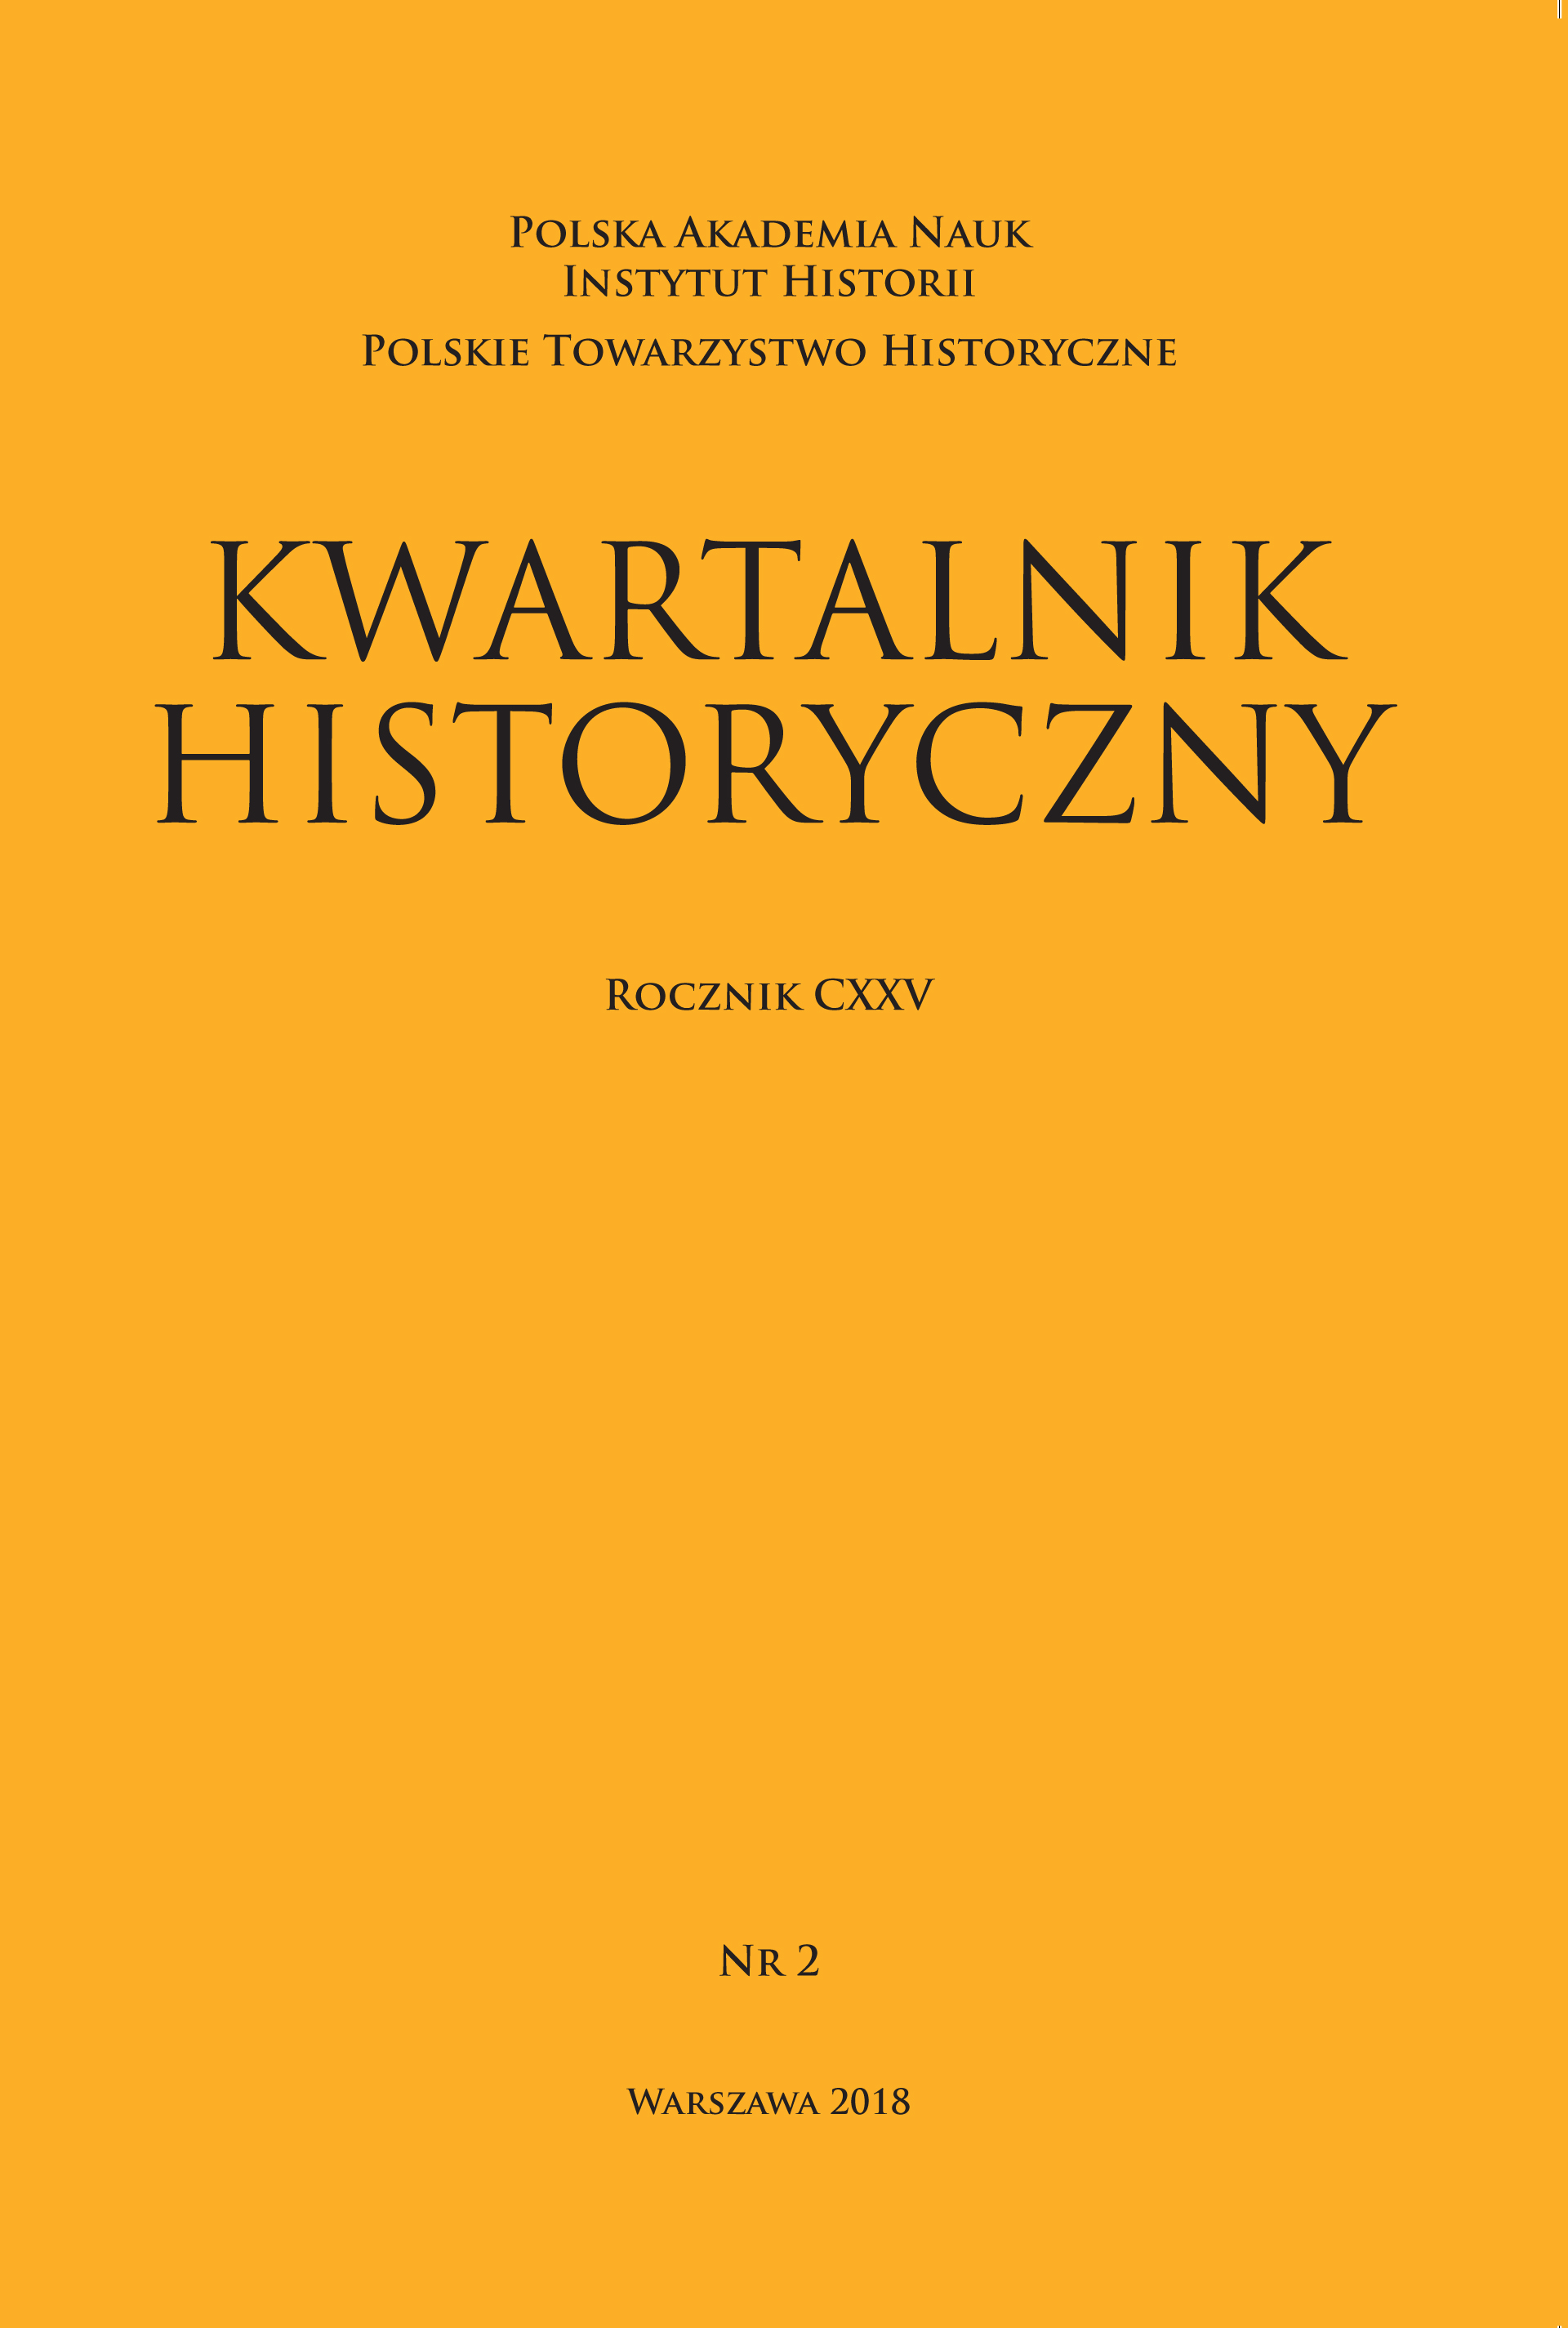 The Crisis, Collapse, and Revival of the Commonwealth during the Second Northern War (1655–1660) Cover Image